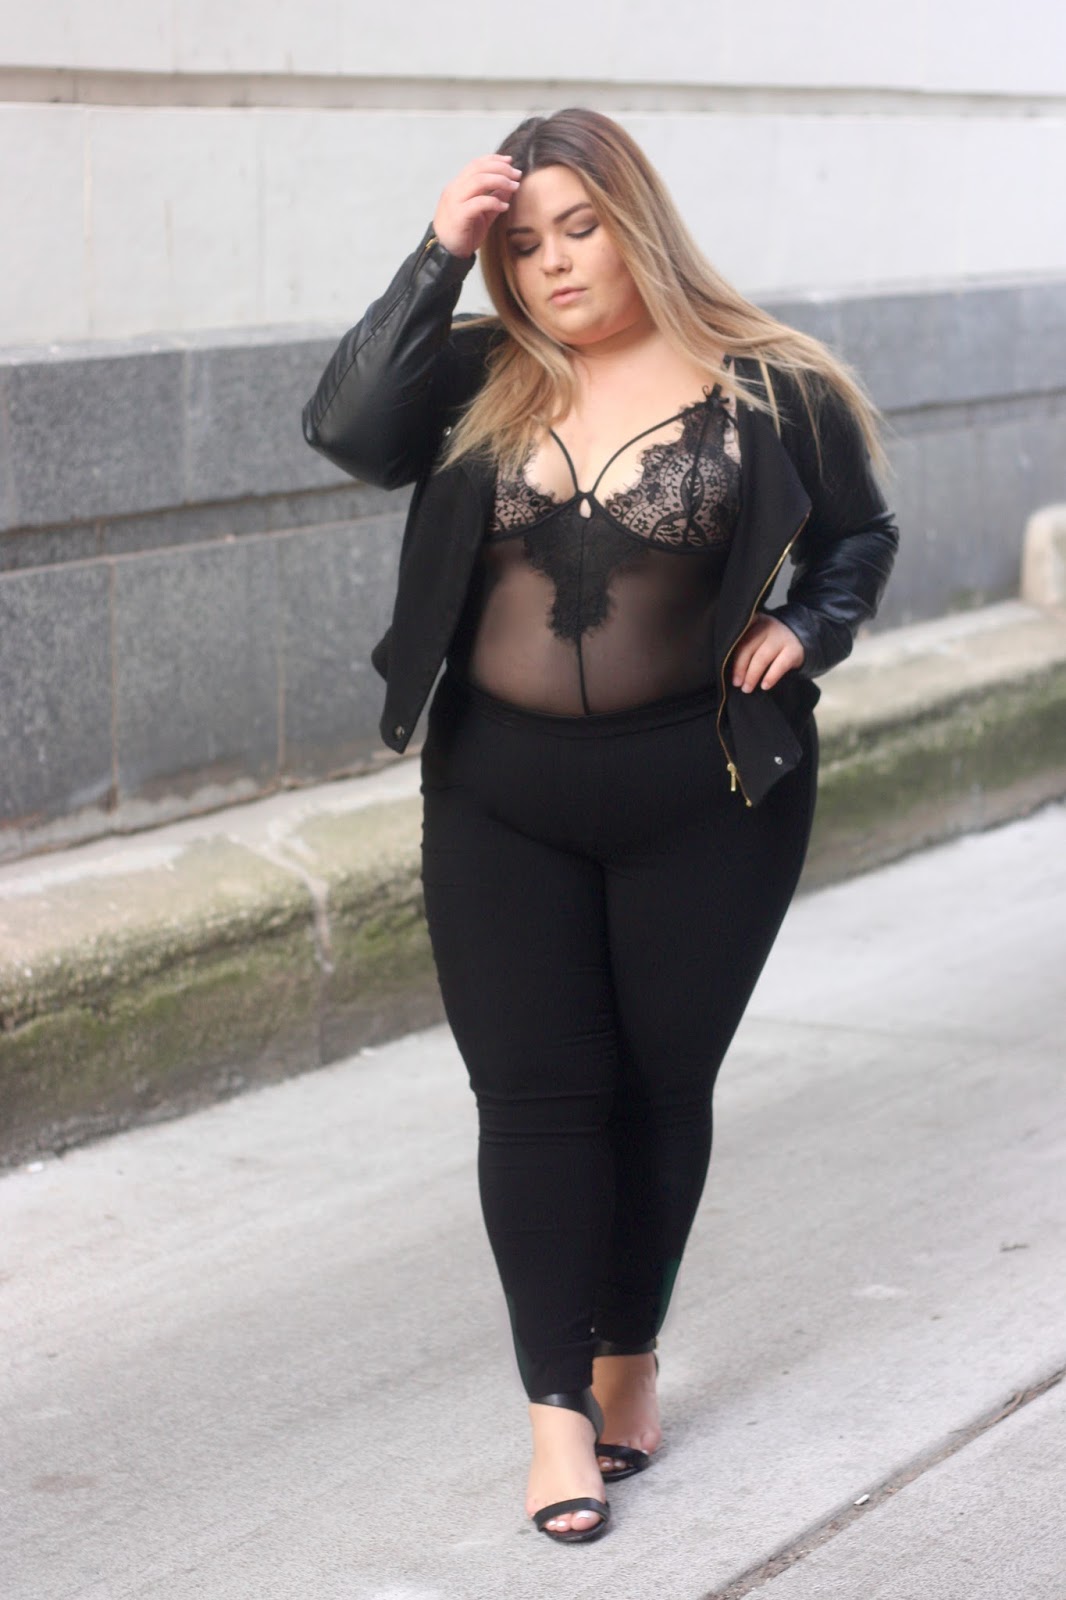 LINGERIE STREET STYLE - Natalie in the City